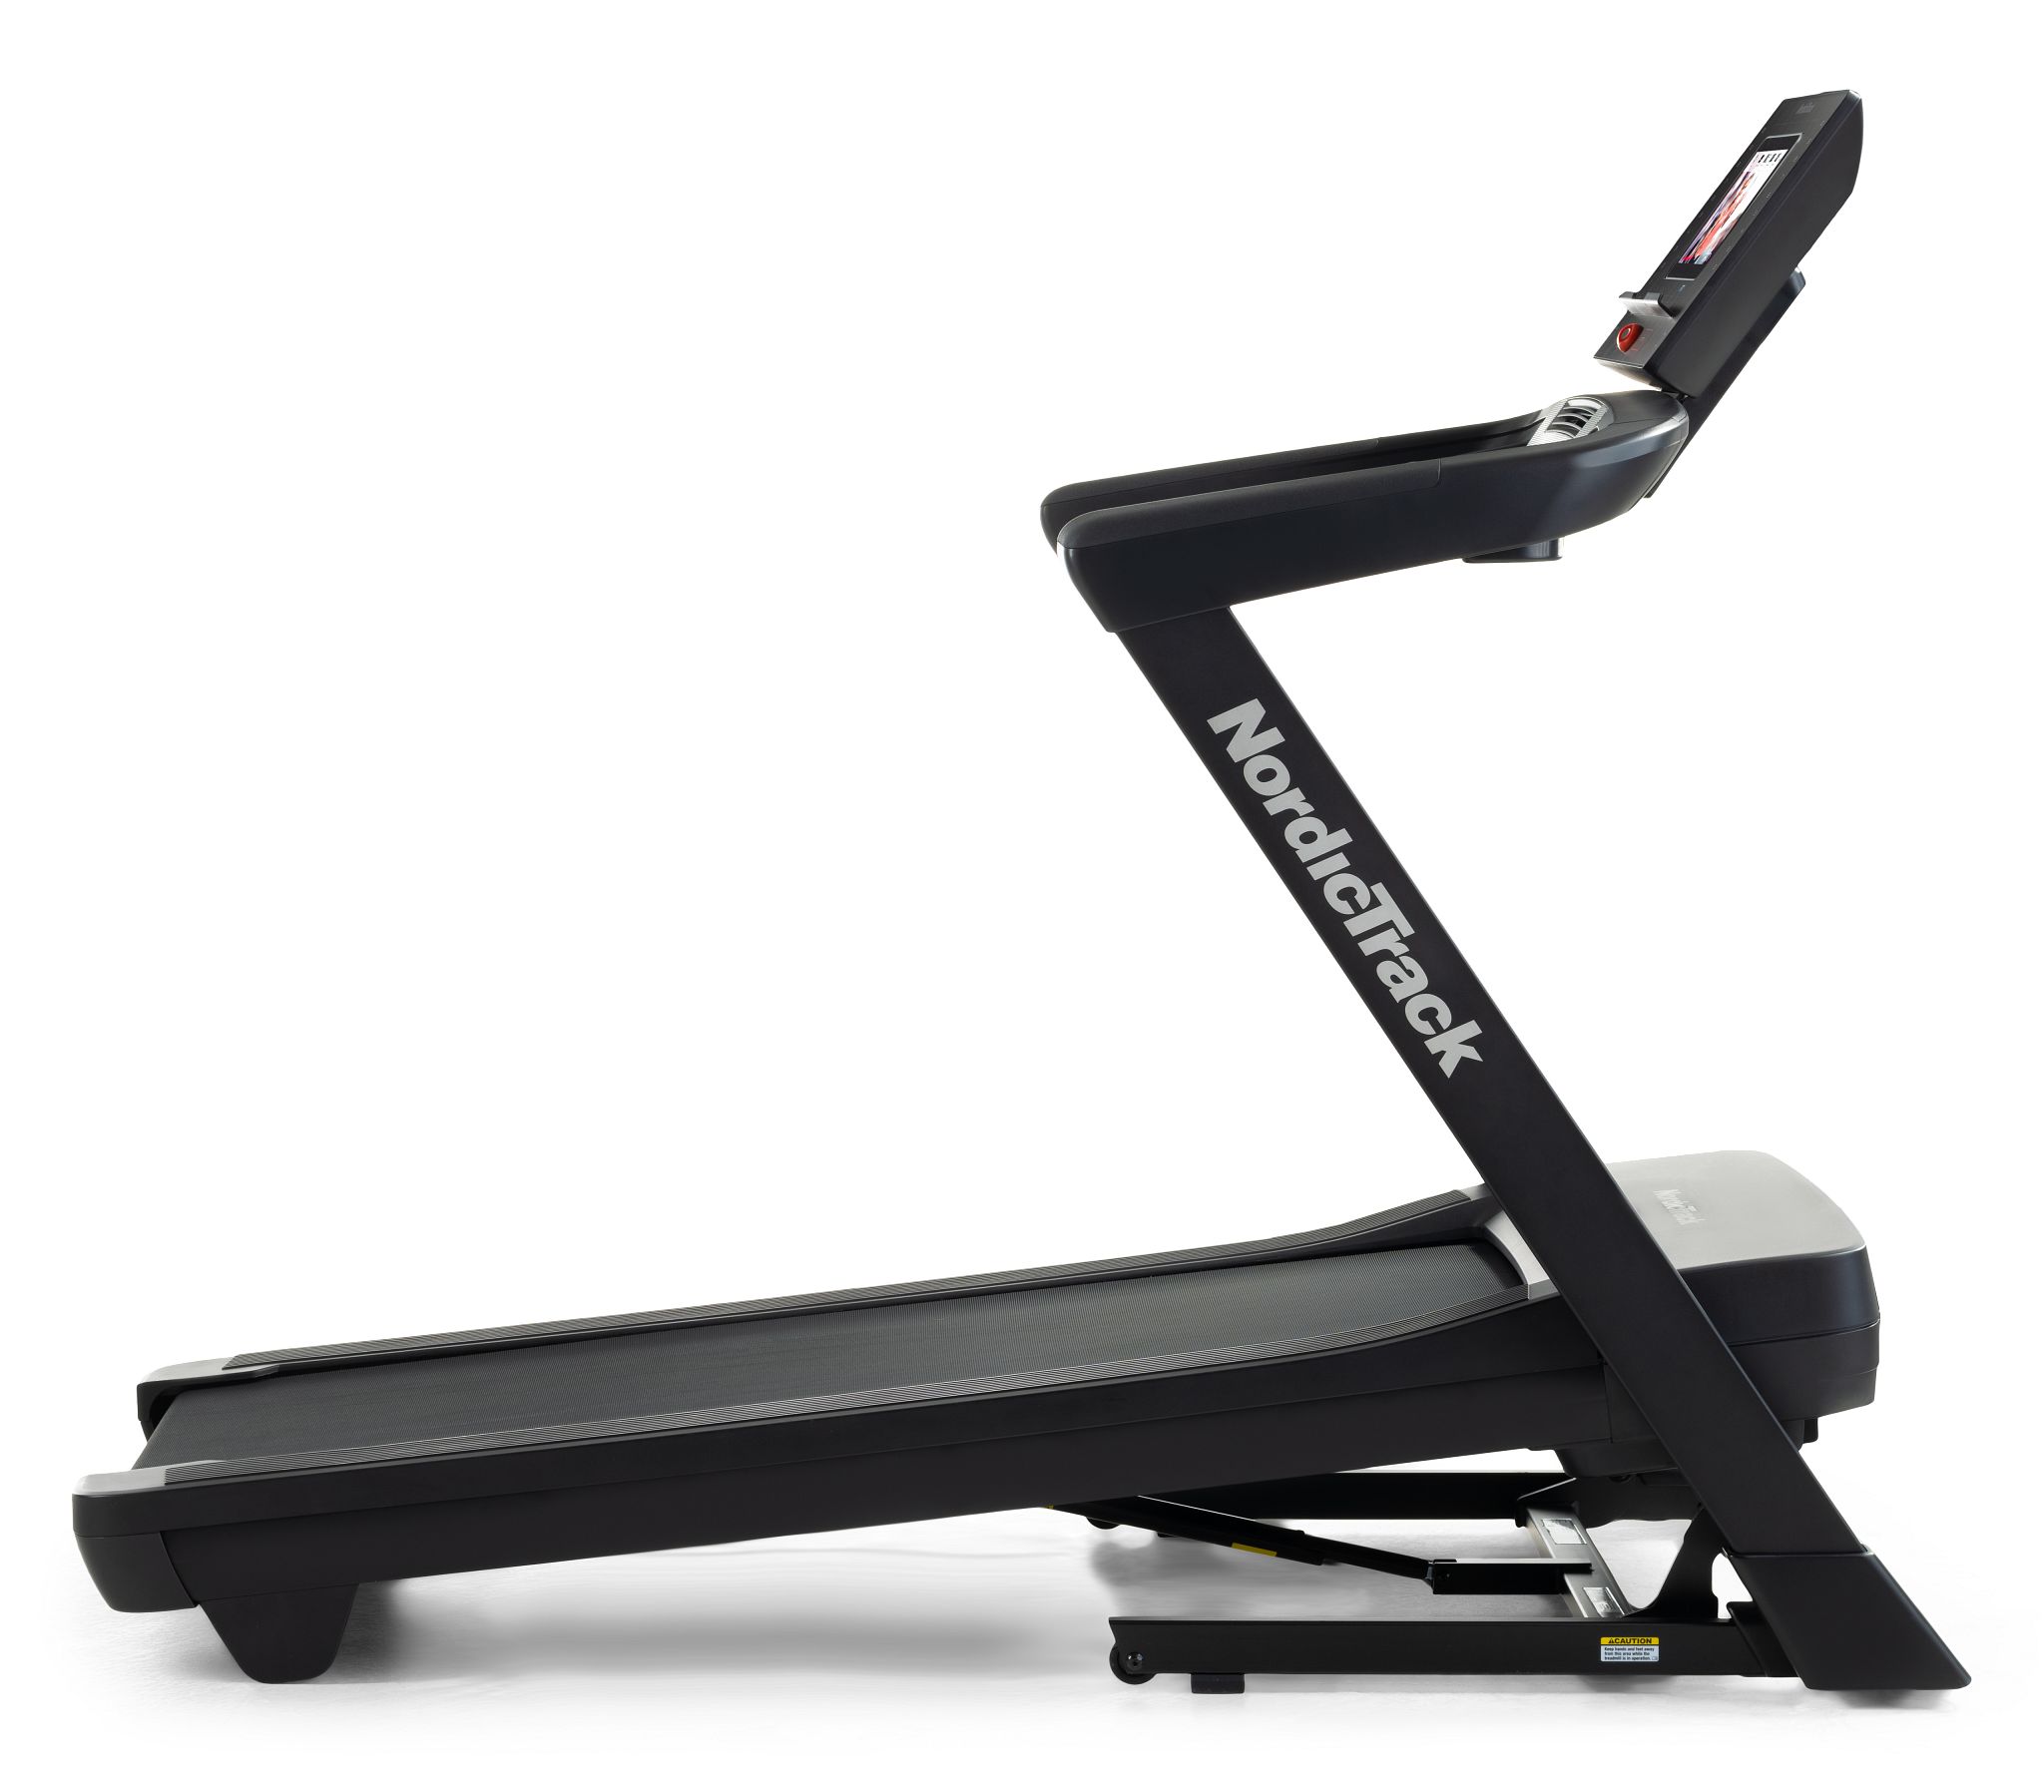 NORDICTRACK EXP 10i Treadmill - Foldable, LED Display, Heart Rate ...